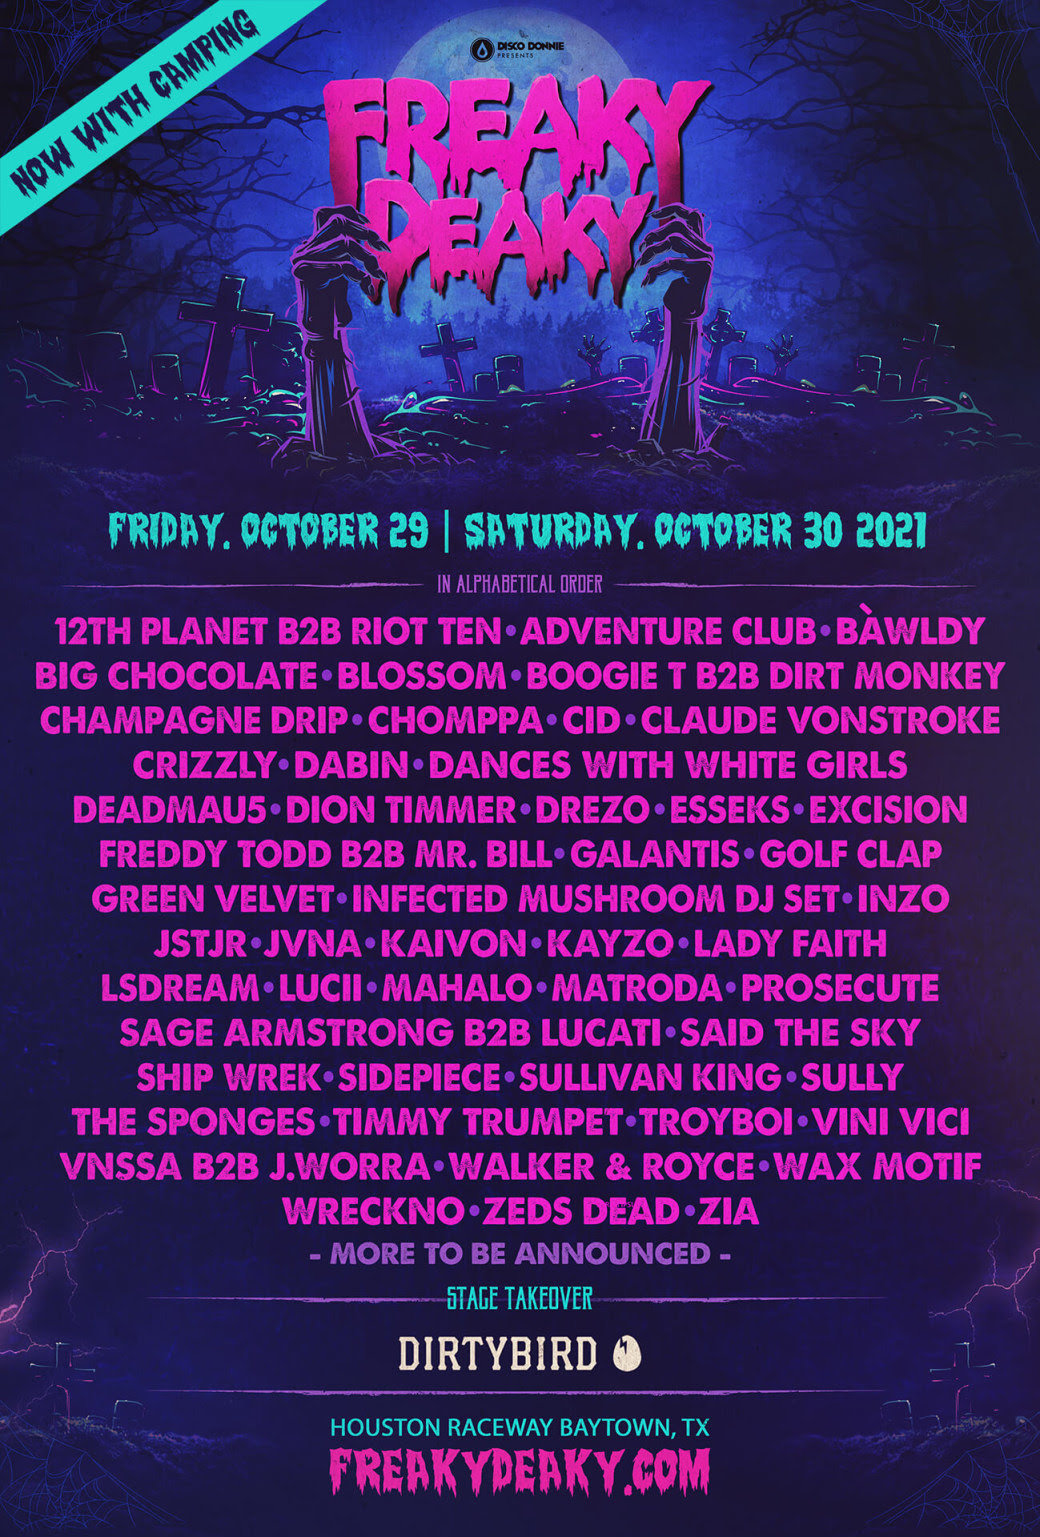 Freaky Deaky announces its 2021 lineup with over 50 acts